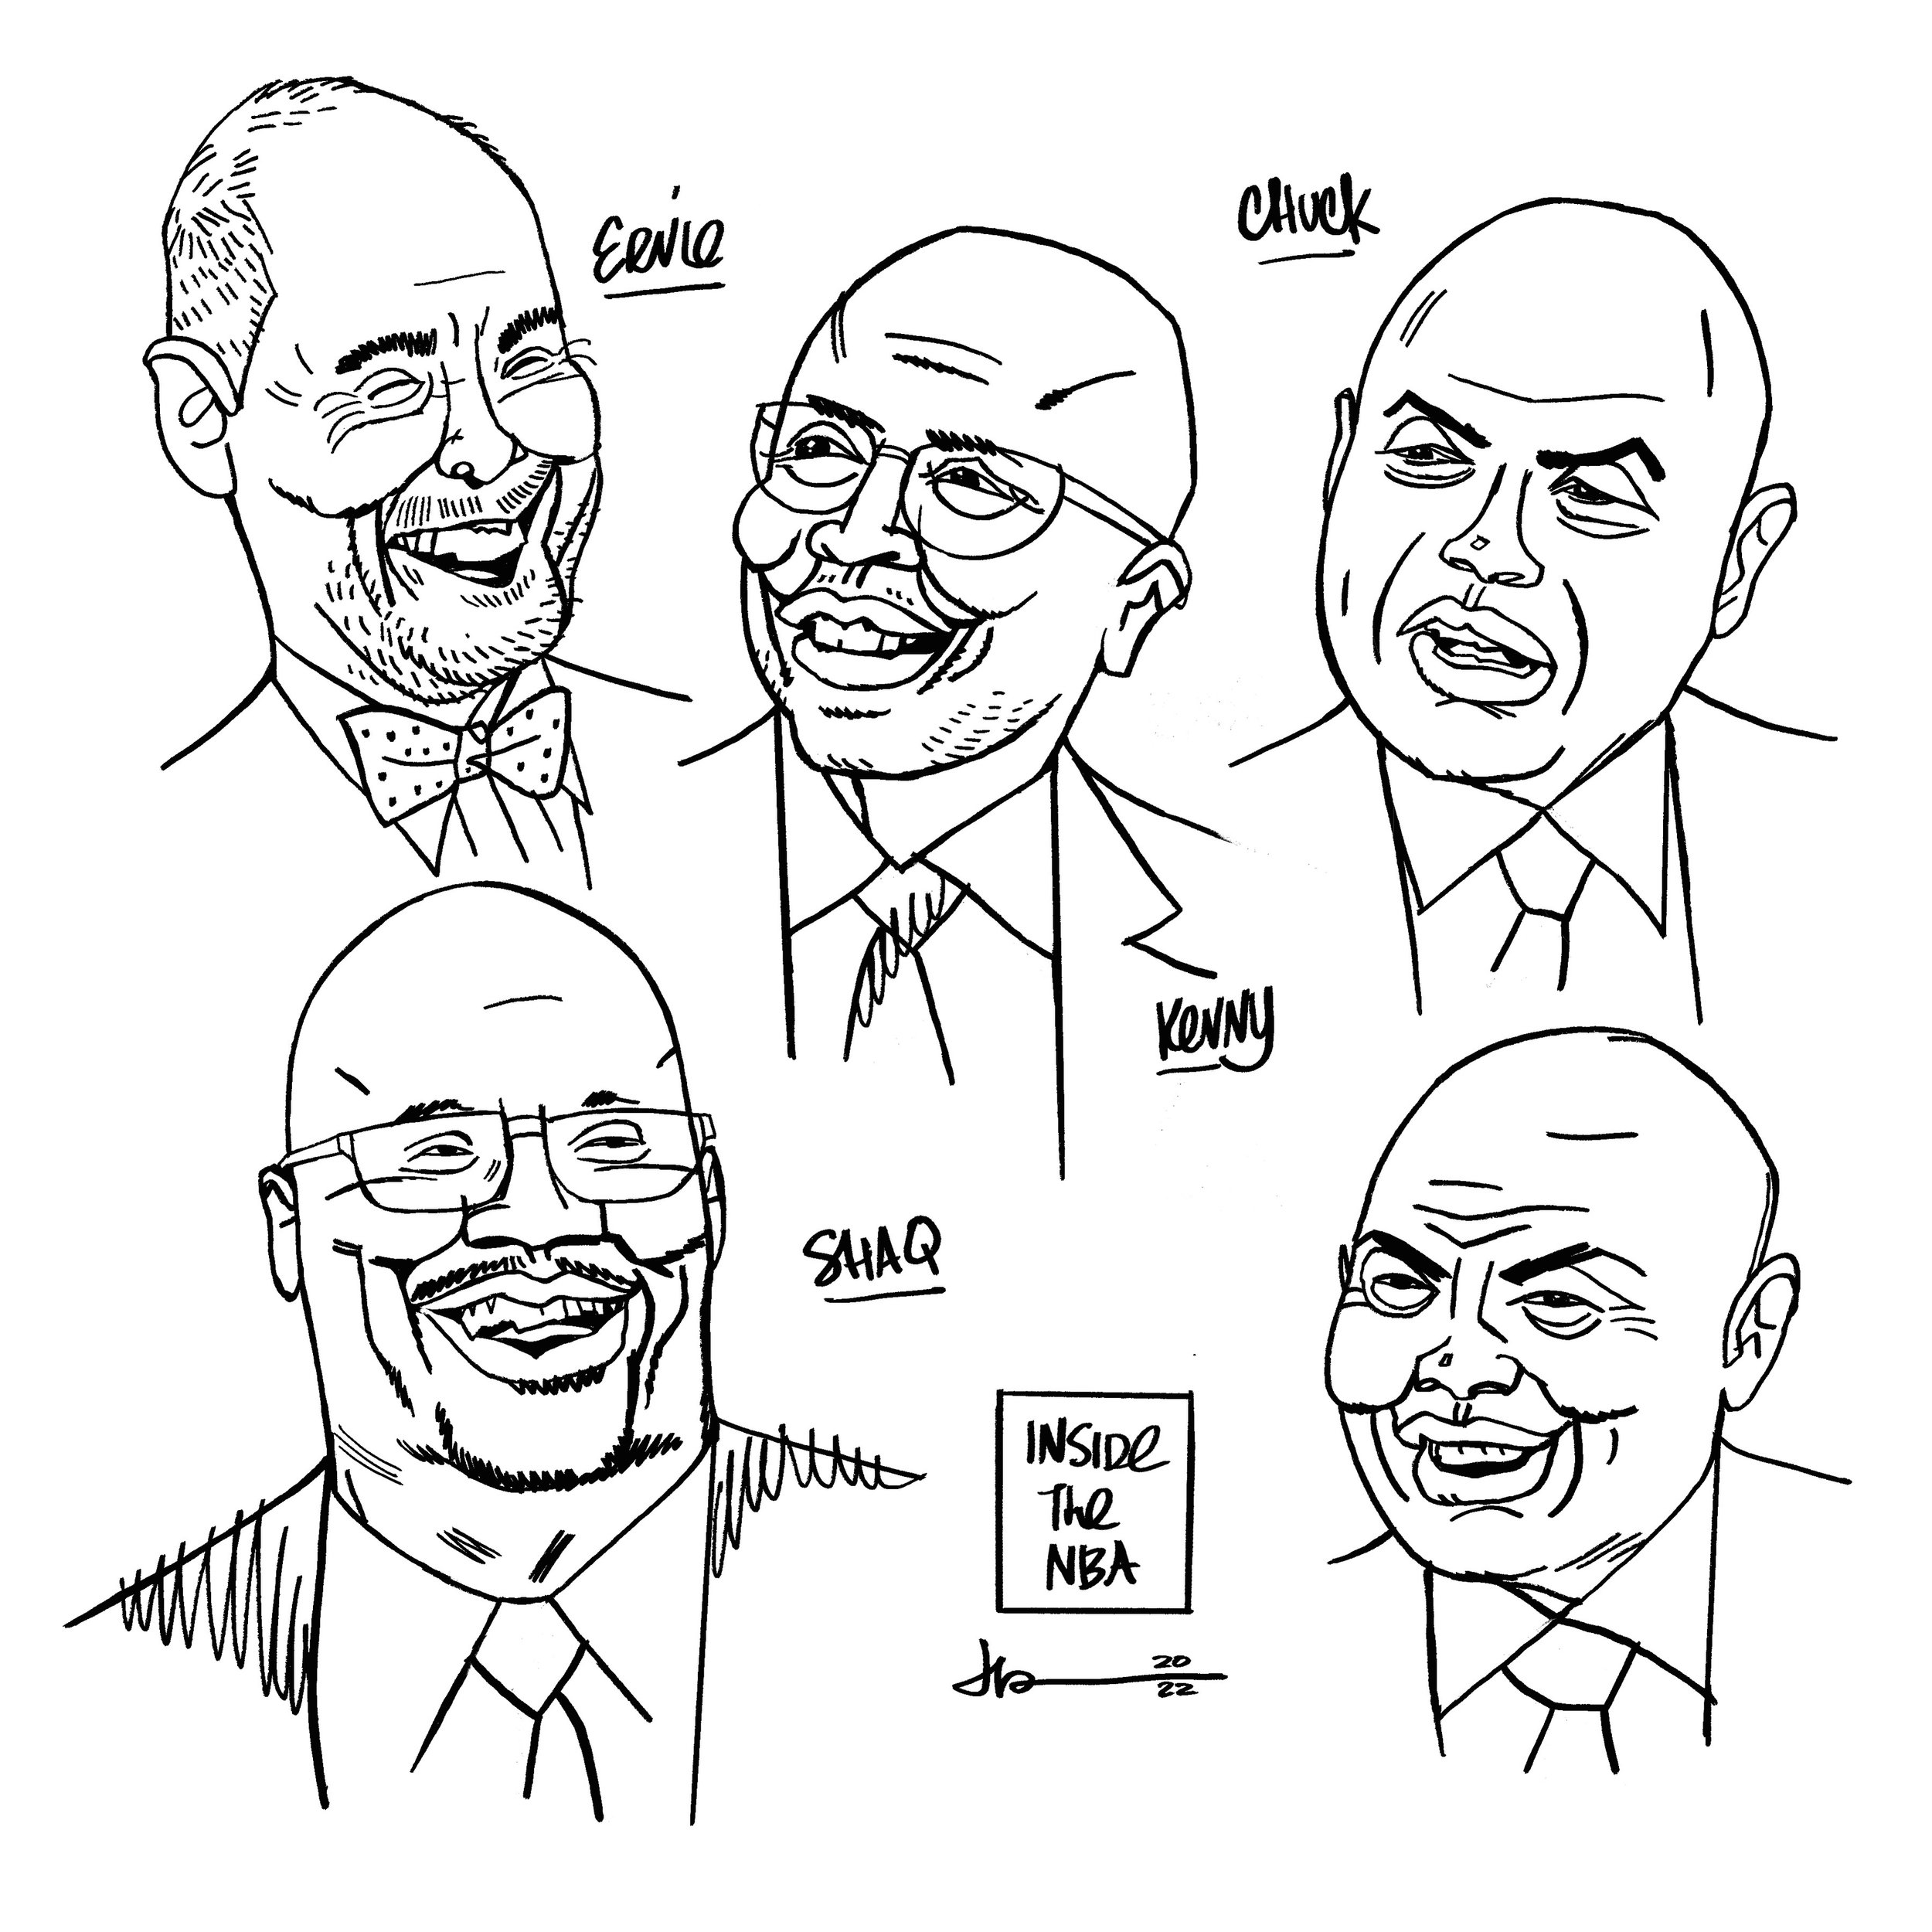 The  #nbaplayoffs are here and are already the best, and so are these guys (even when they aren&rsquo;t) 

For comics &amp; more read/join my NEWSLETTER at the link in bio. 

#insidethenba #charlesbarkley #shaq #erniejohnson #kennysmith